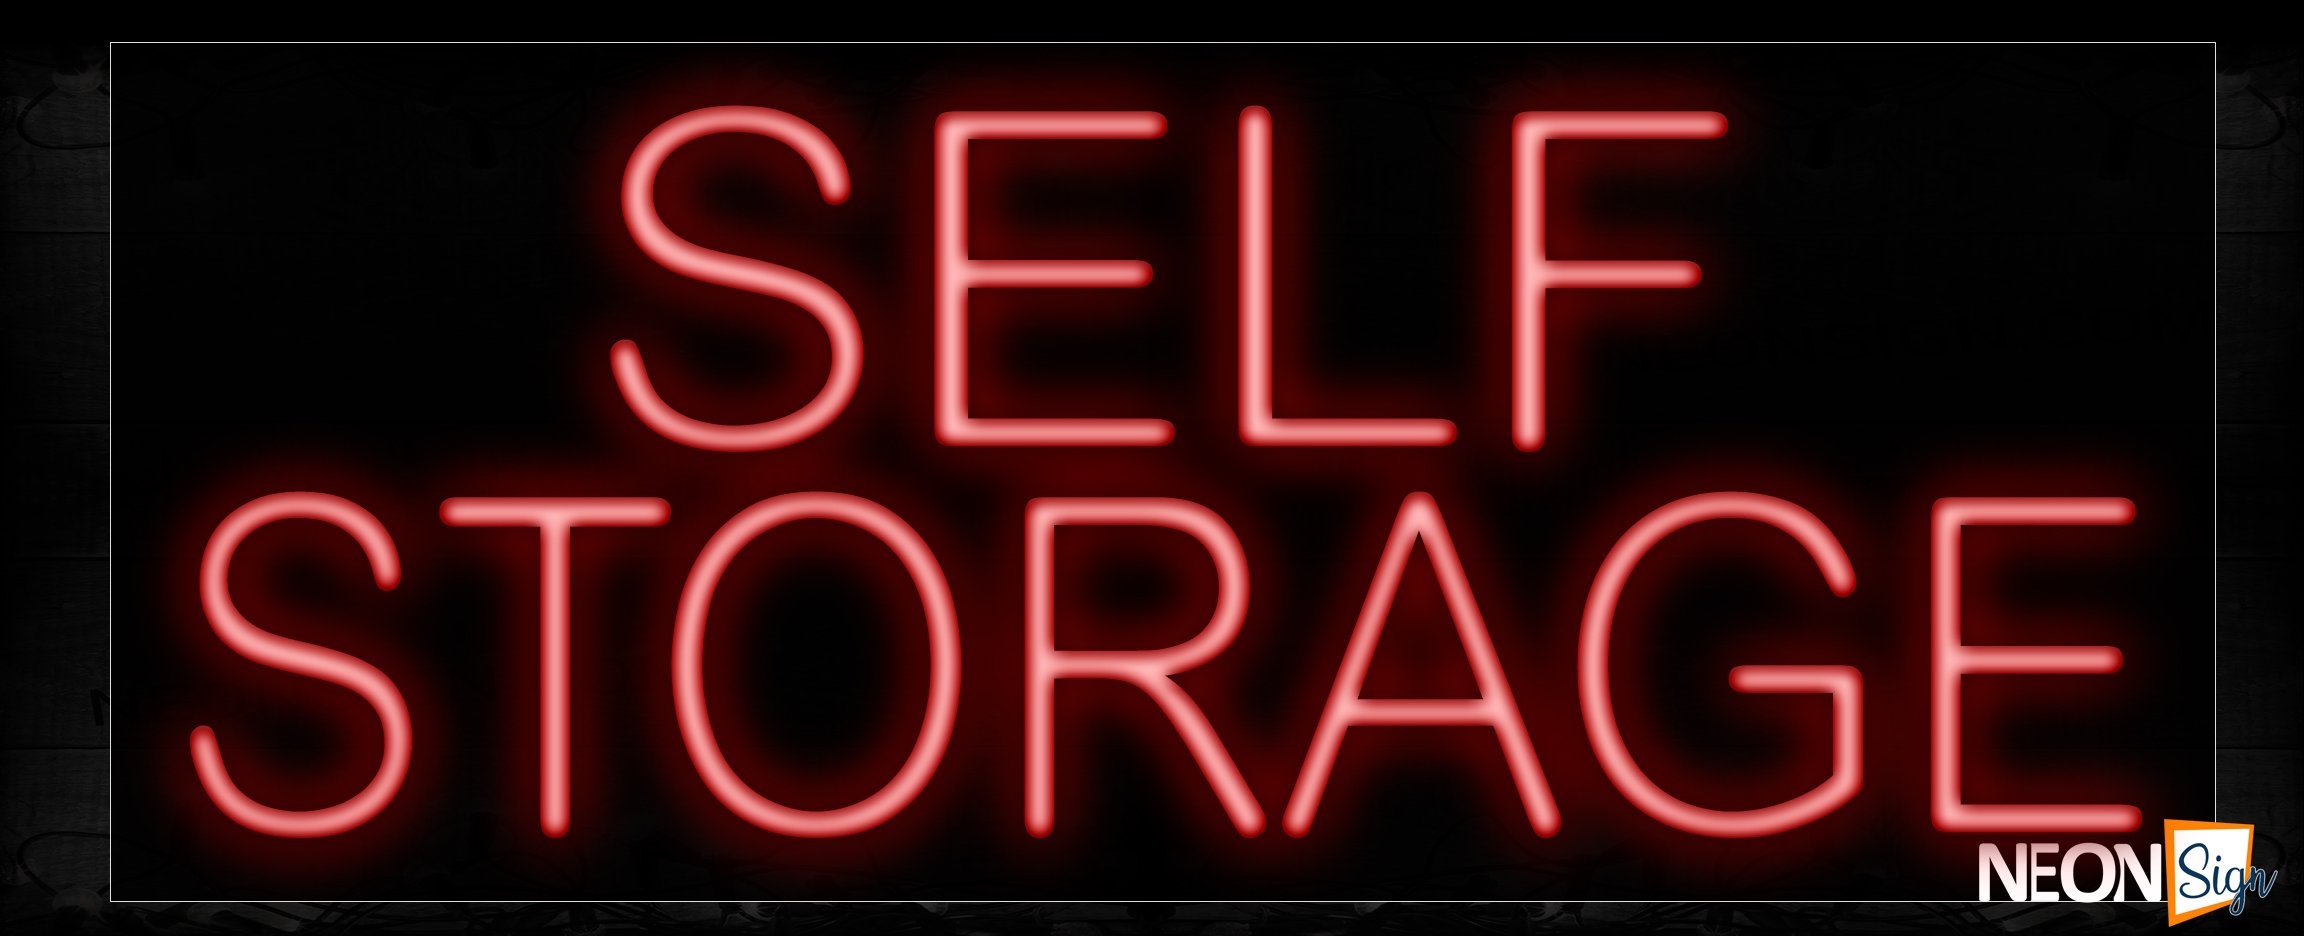 Image of Self Storage In Red Neon Sign